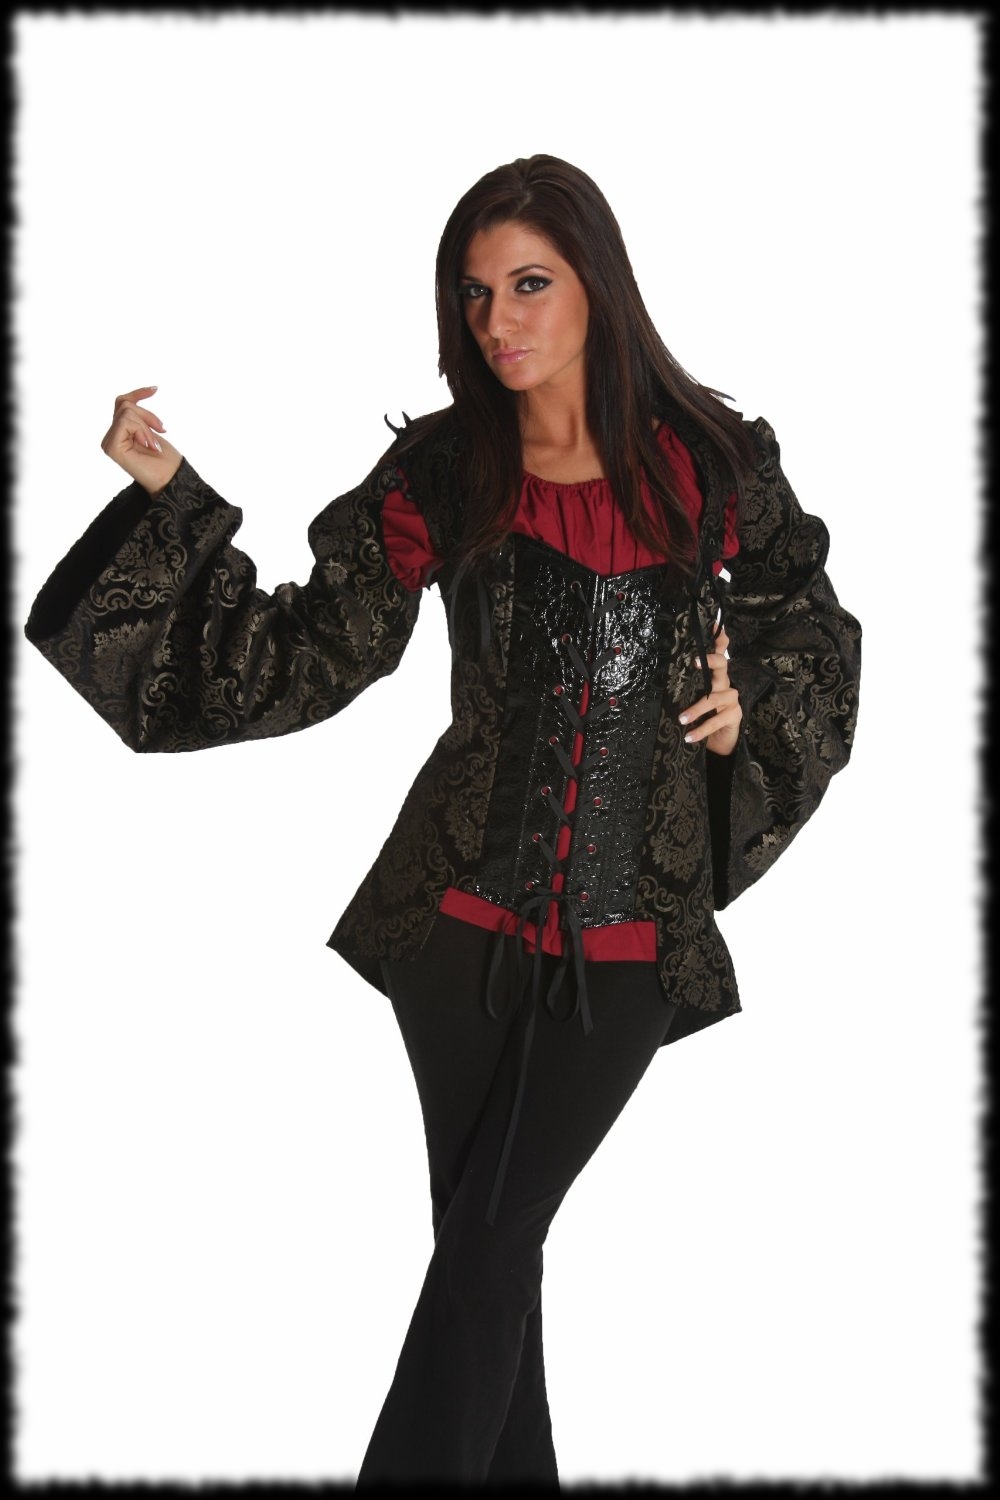 Lady's Deluxe Pirate Halloween Costume Top with Sleaves